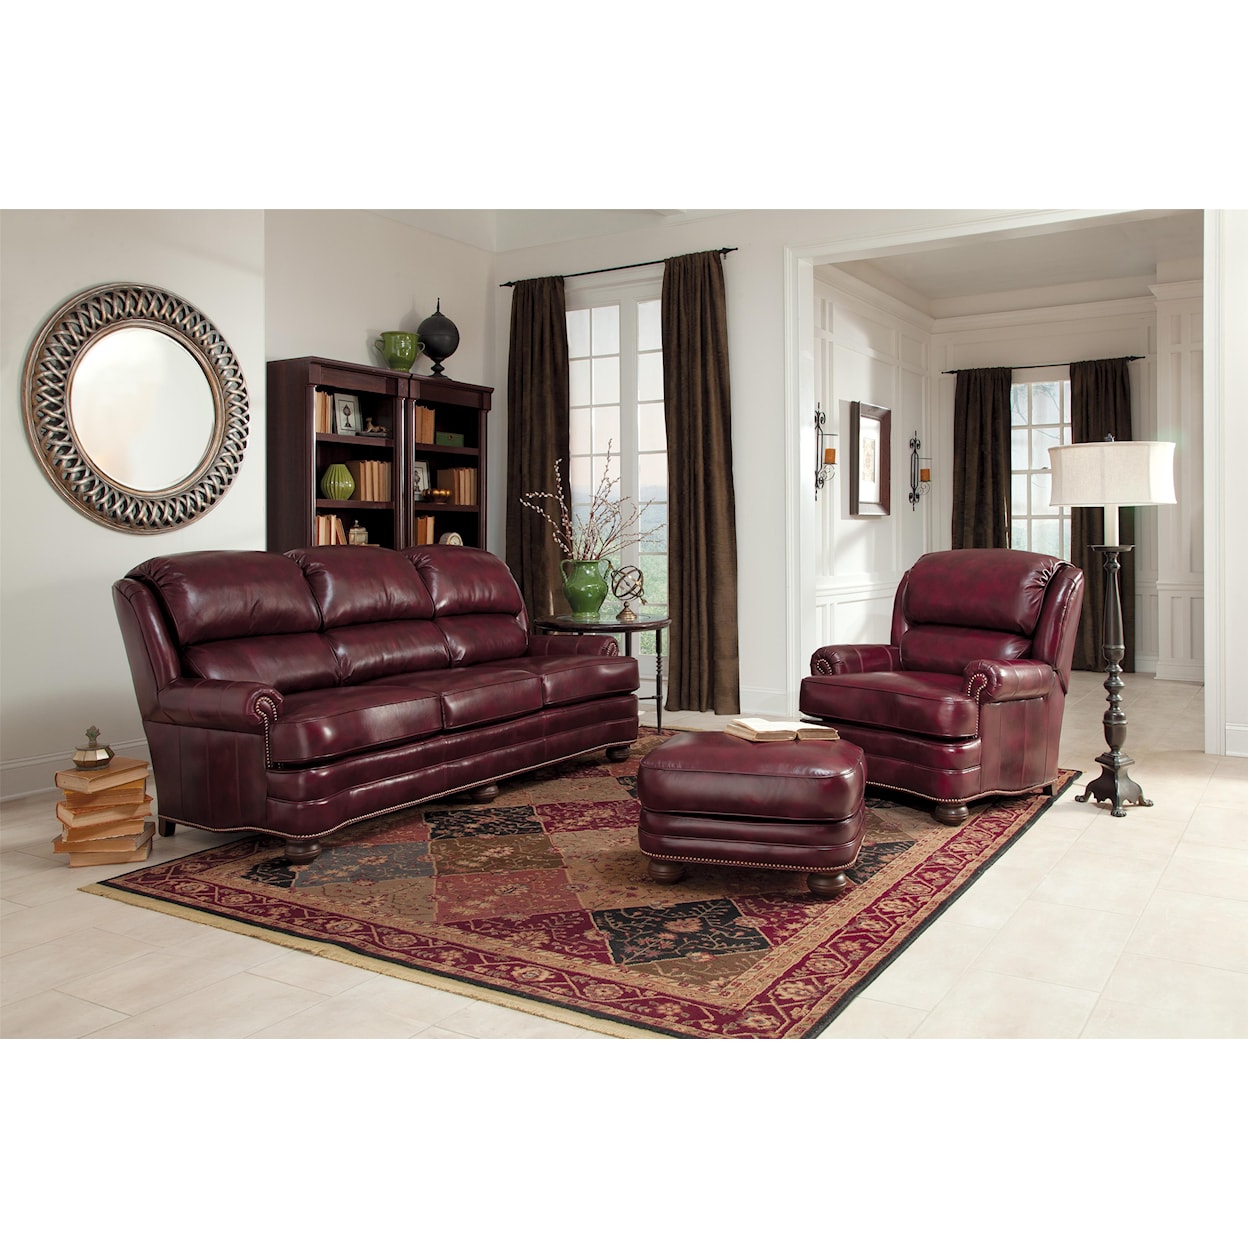 Smith Brothers 311 Stationary Living Room Group